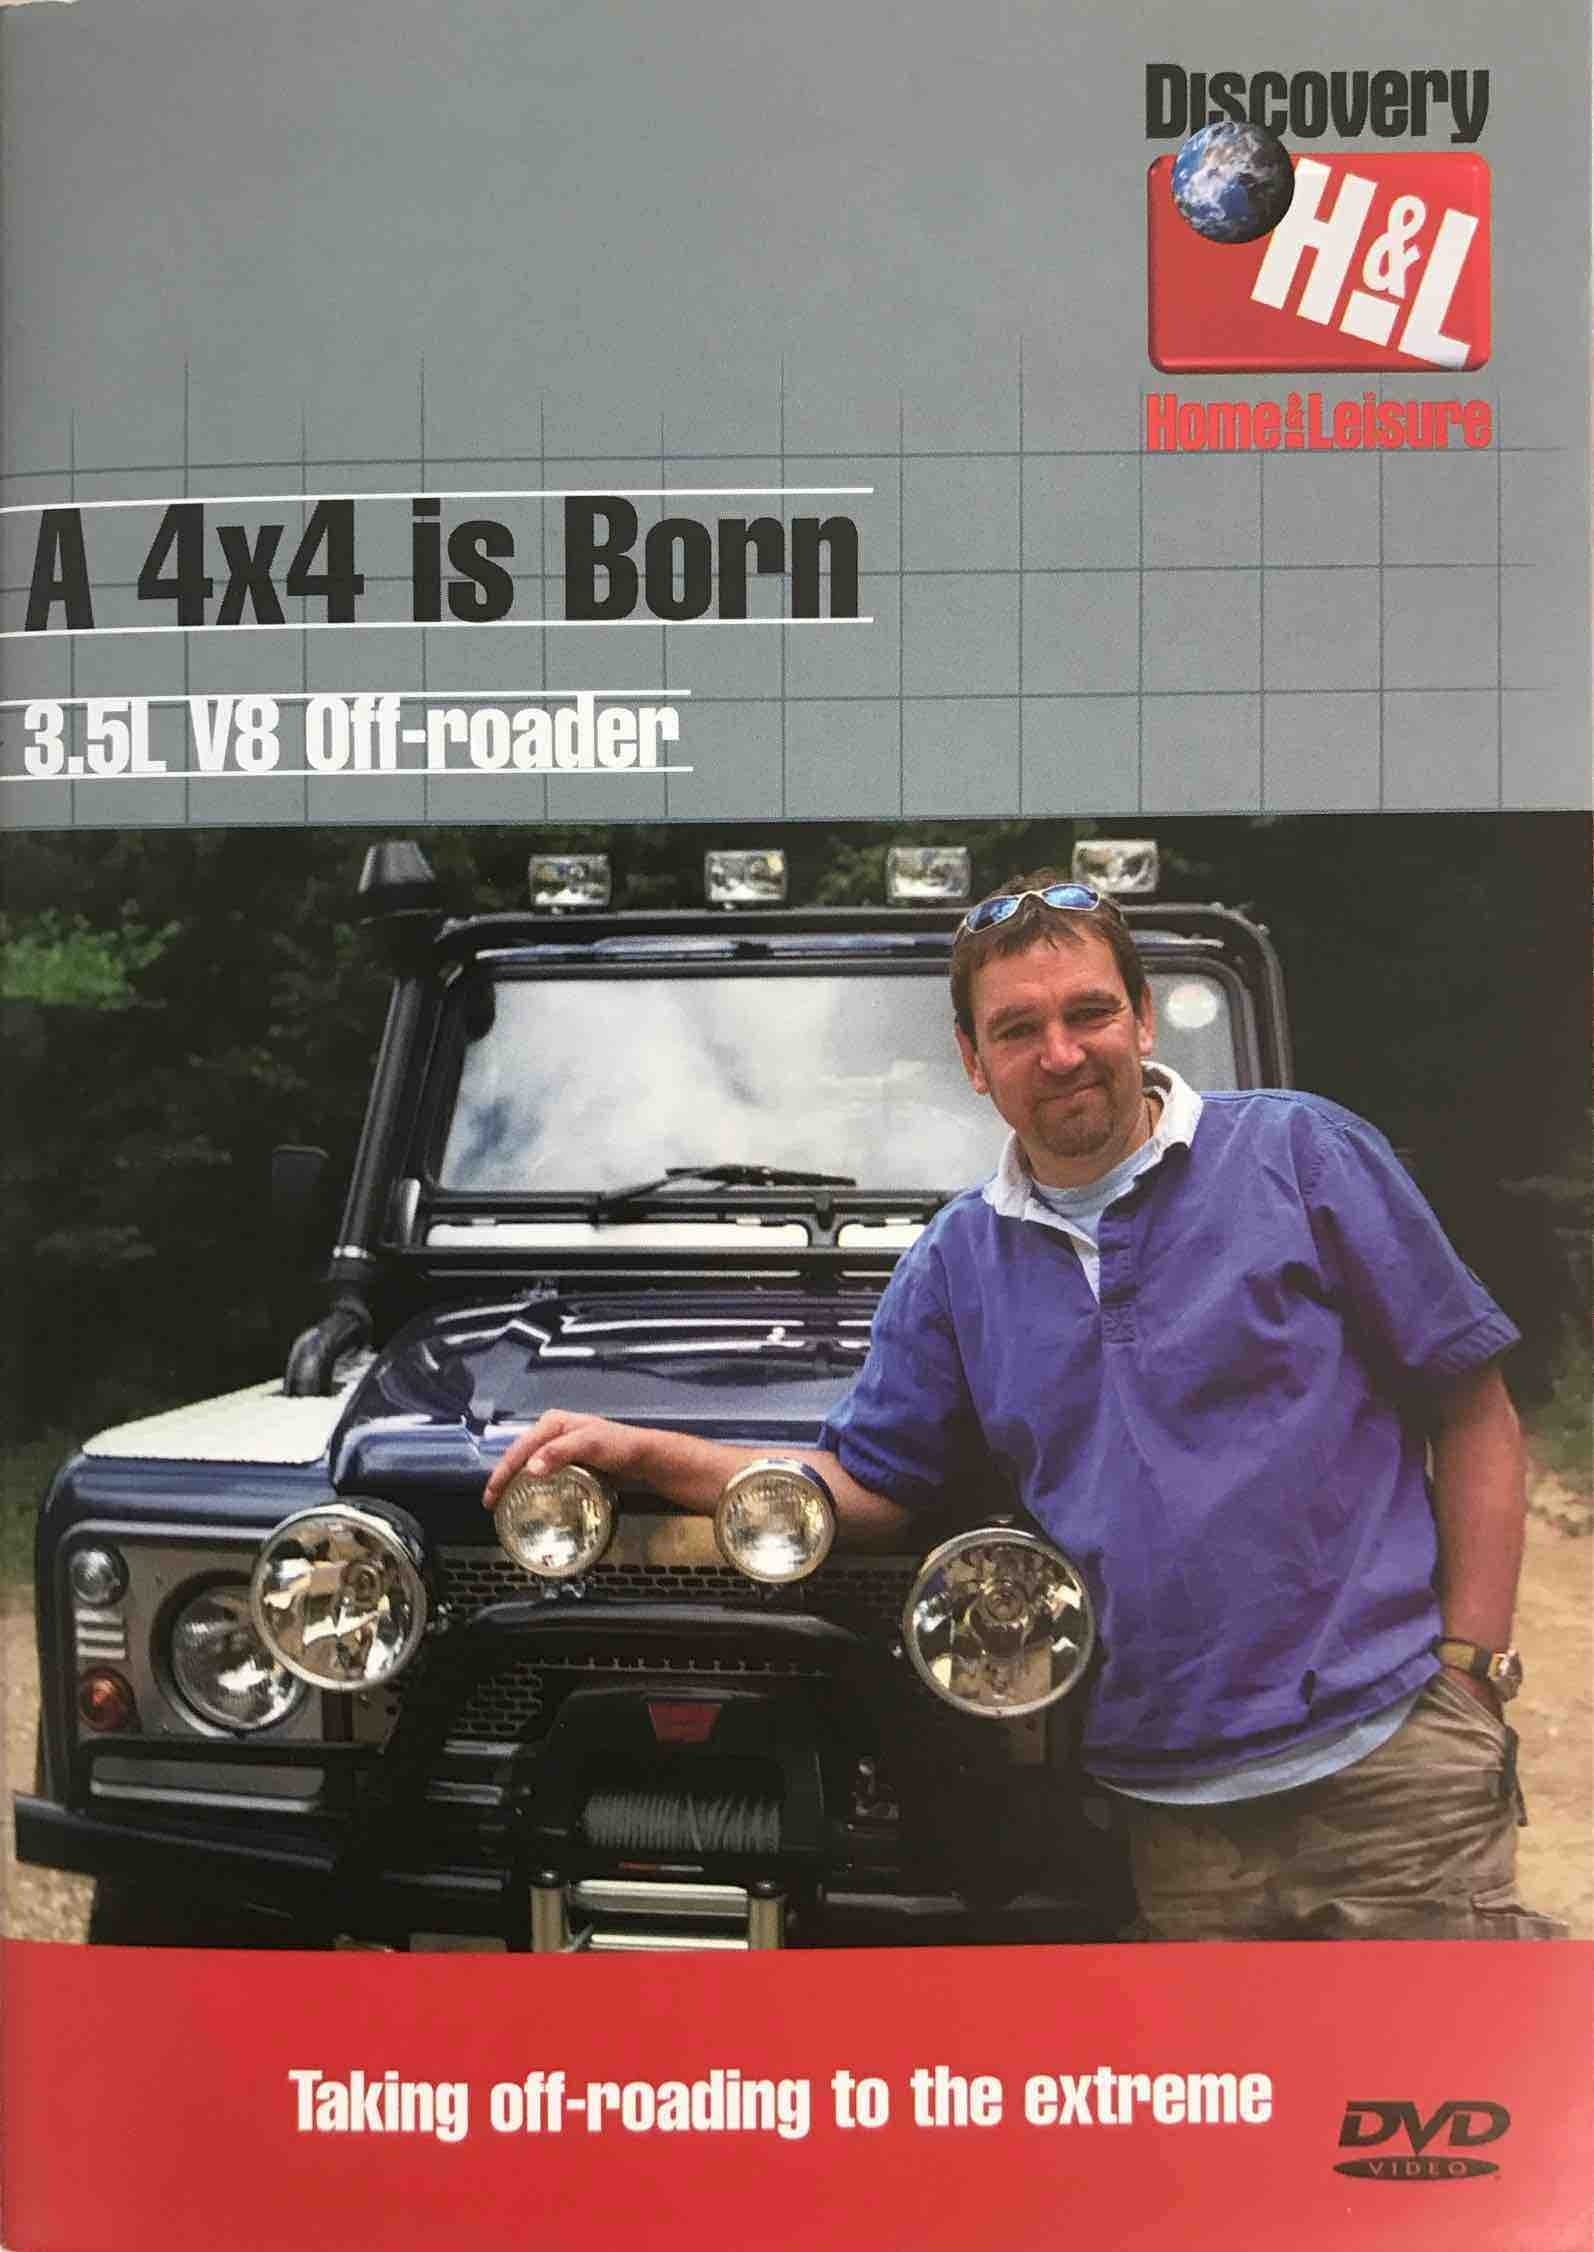 A 4x4 is Born